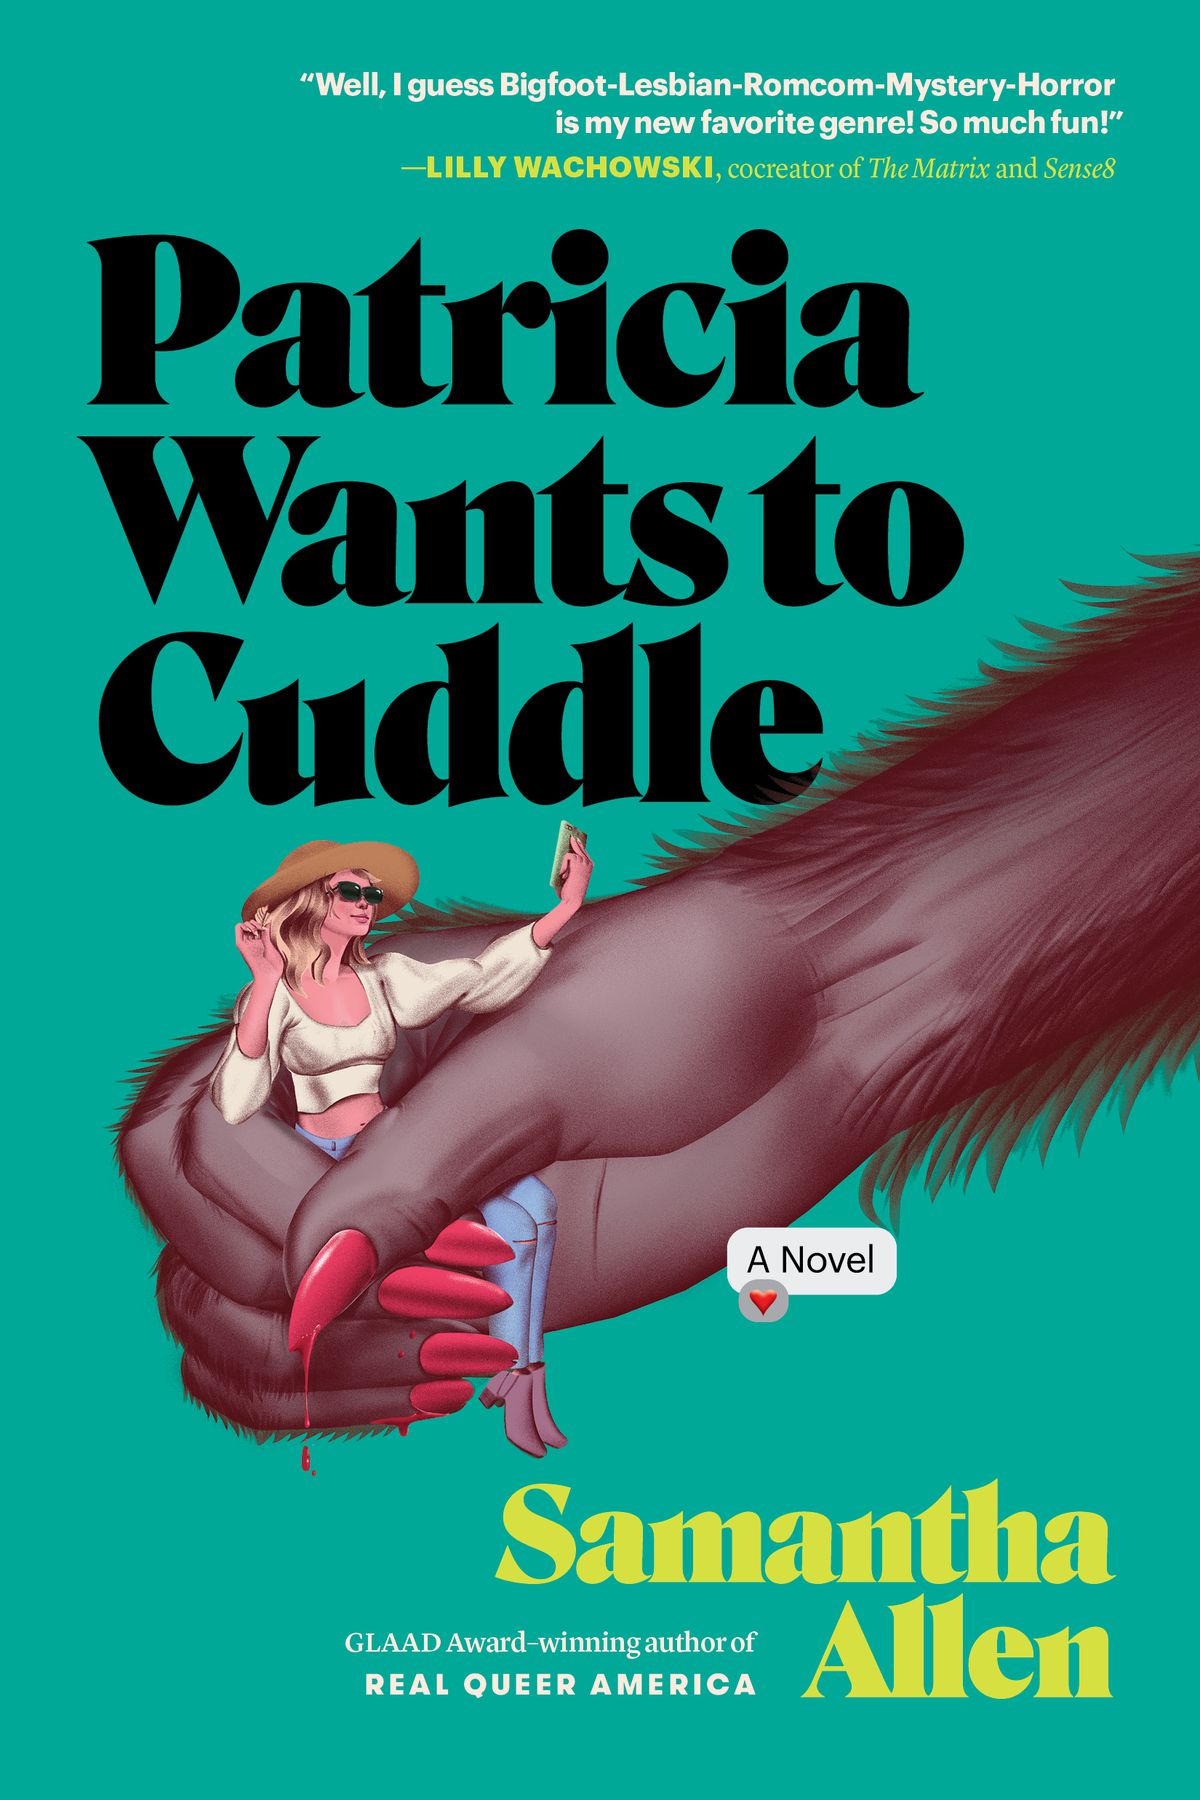 Cover image for Samantha Allen’s Patricia Wants to Cuddle. Set against a teal background, it shows a woman taking a selfie while being held in the hand of a bigfoot-like creature.